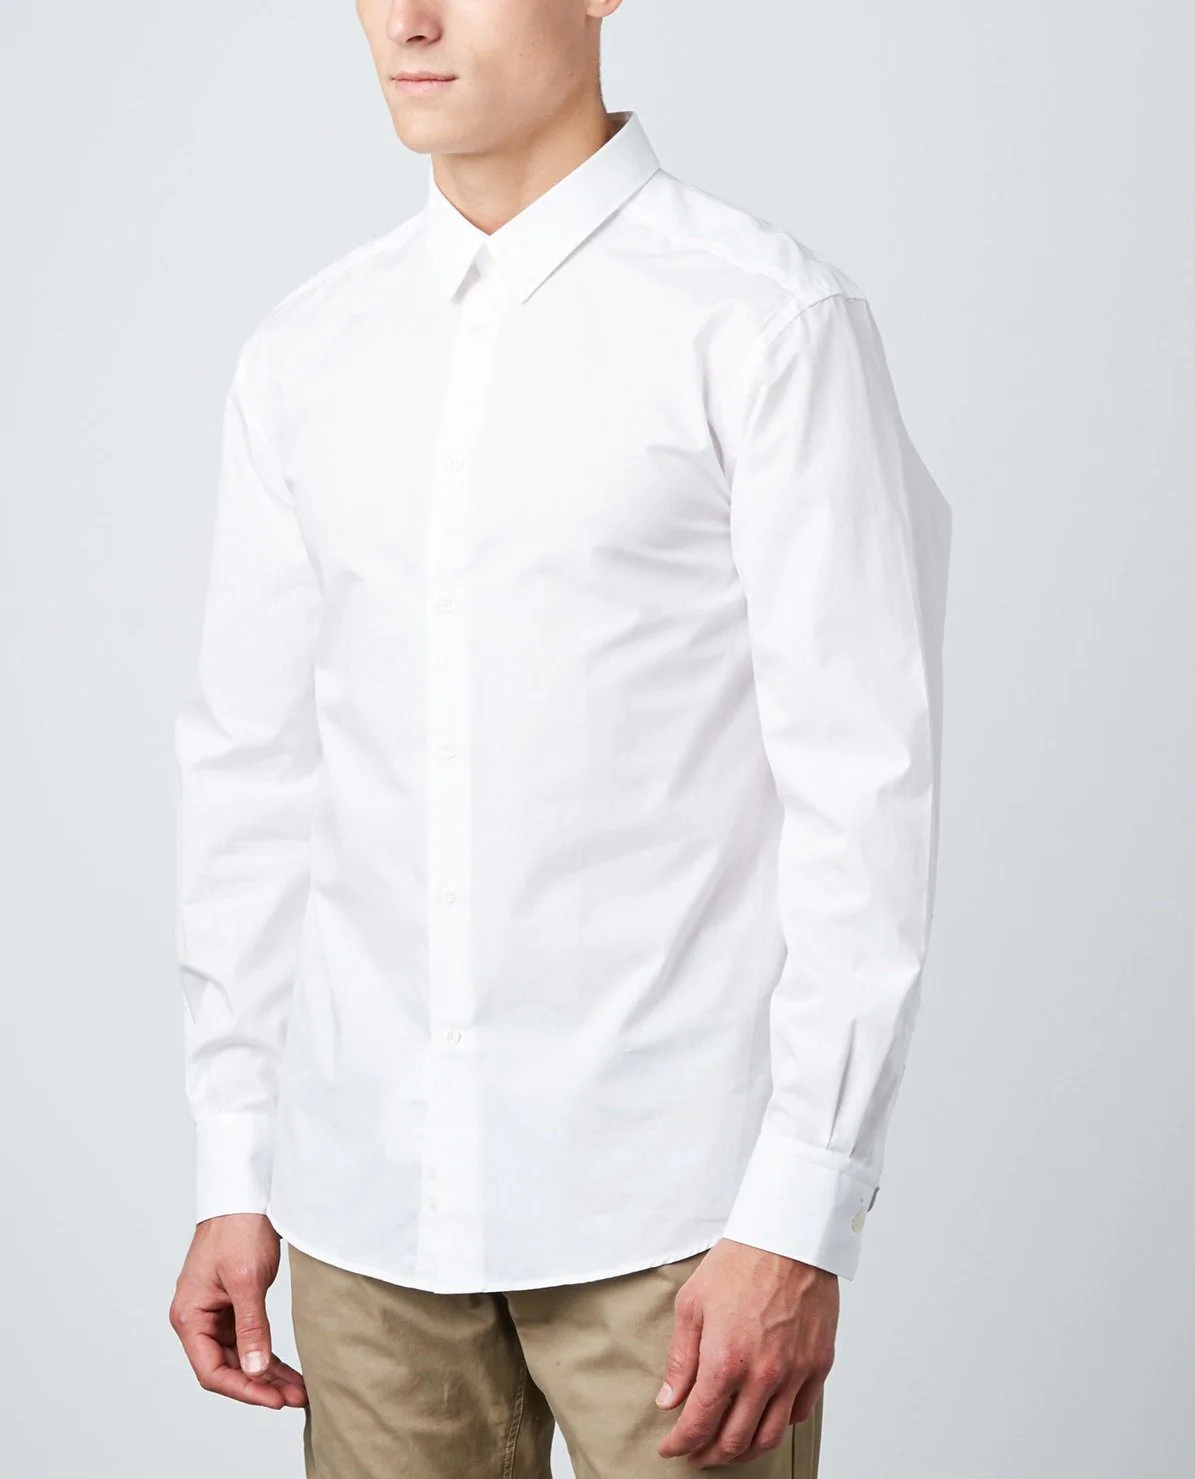 VERSACE COLLECTION City Fit Dress Shirt, White